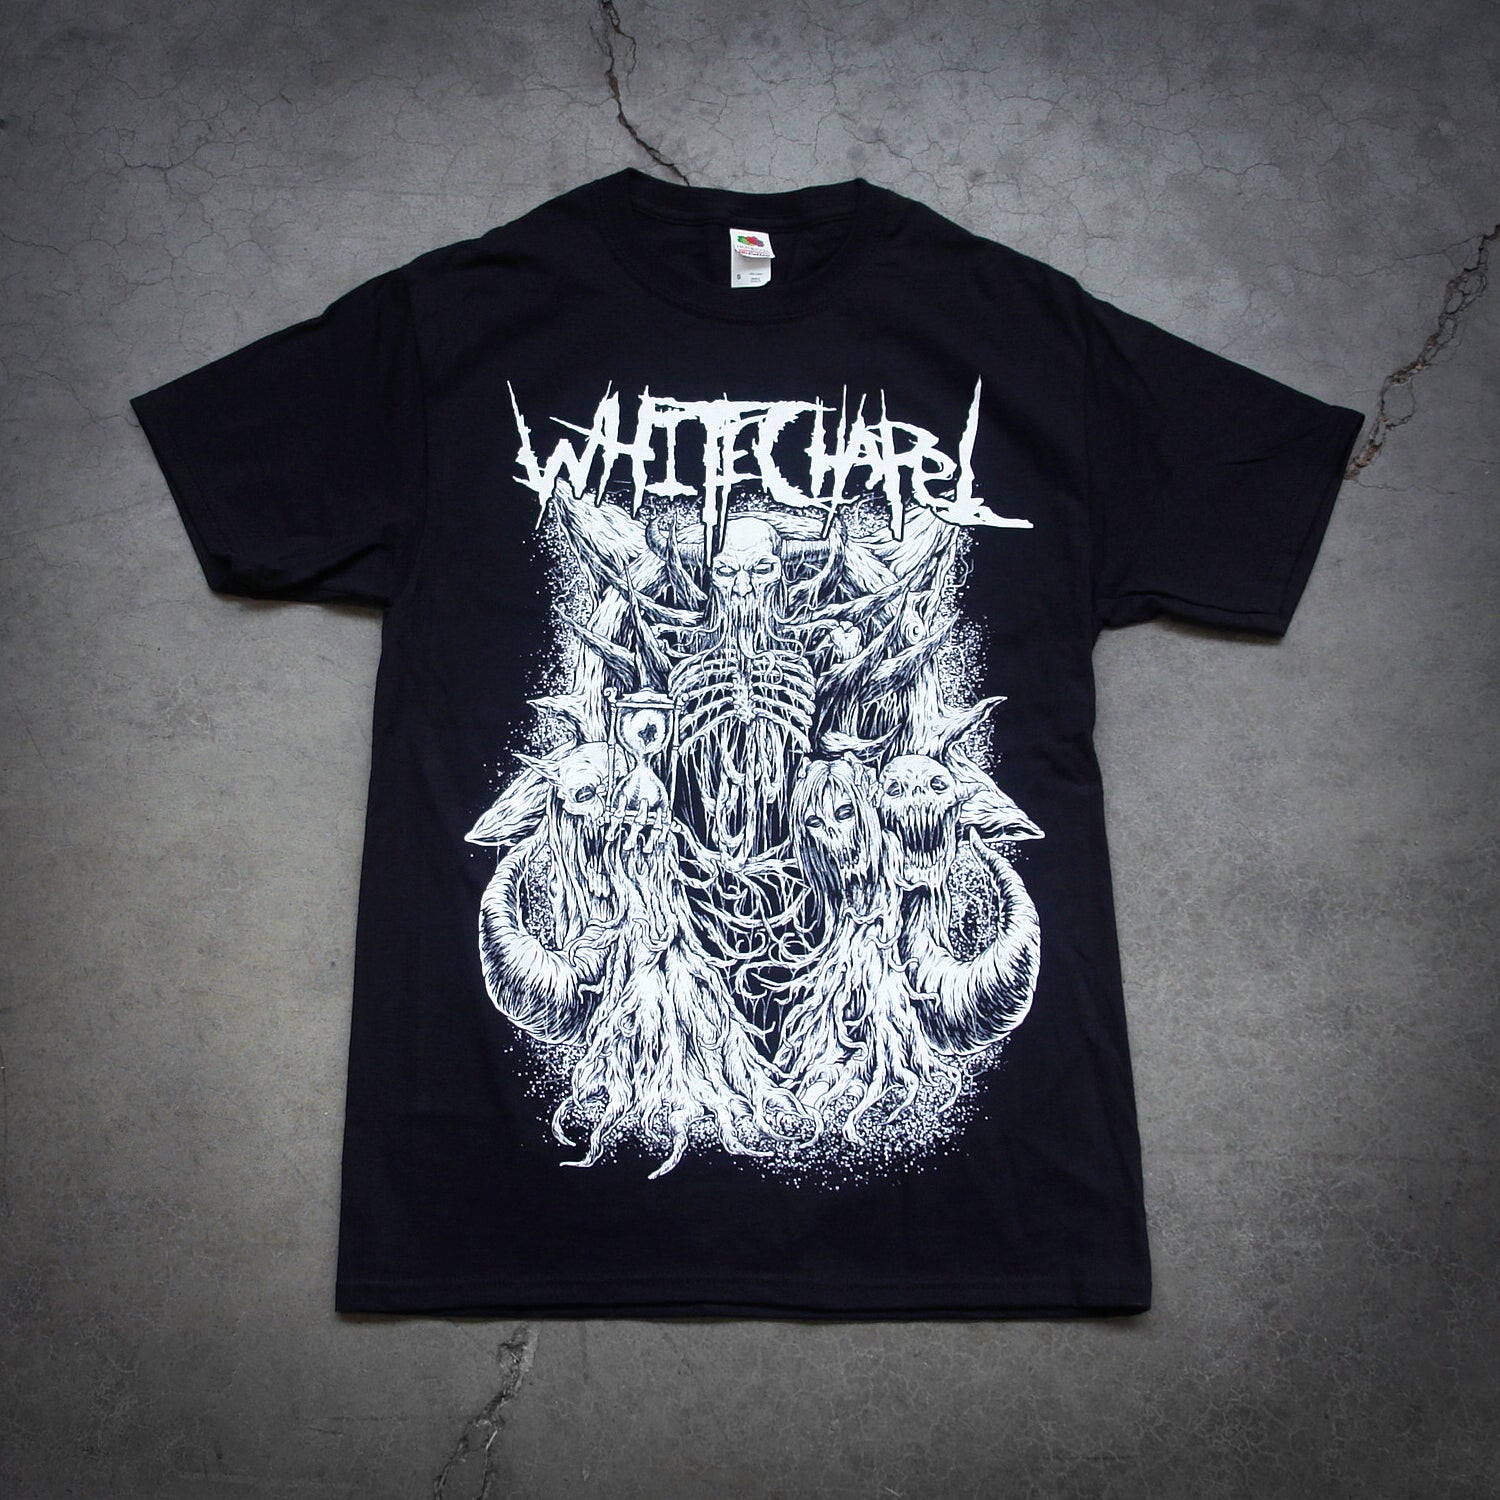 image of a black tee shirt laid flat on a cracked concrete floor. tee has full body print in white of a skeleton devil holding an hourglass and has several demons surronding it. at the top says whitechapel.